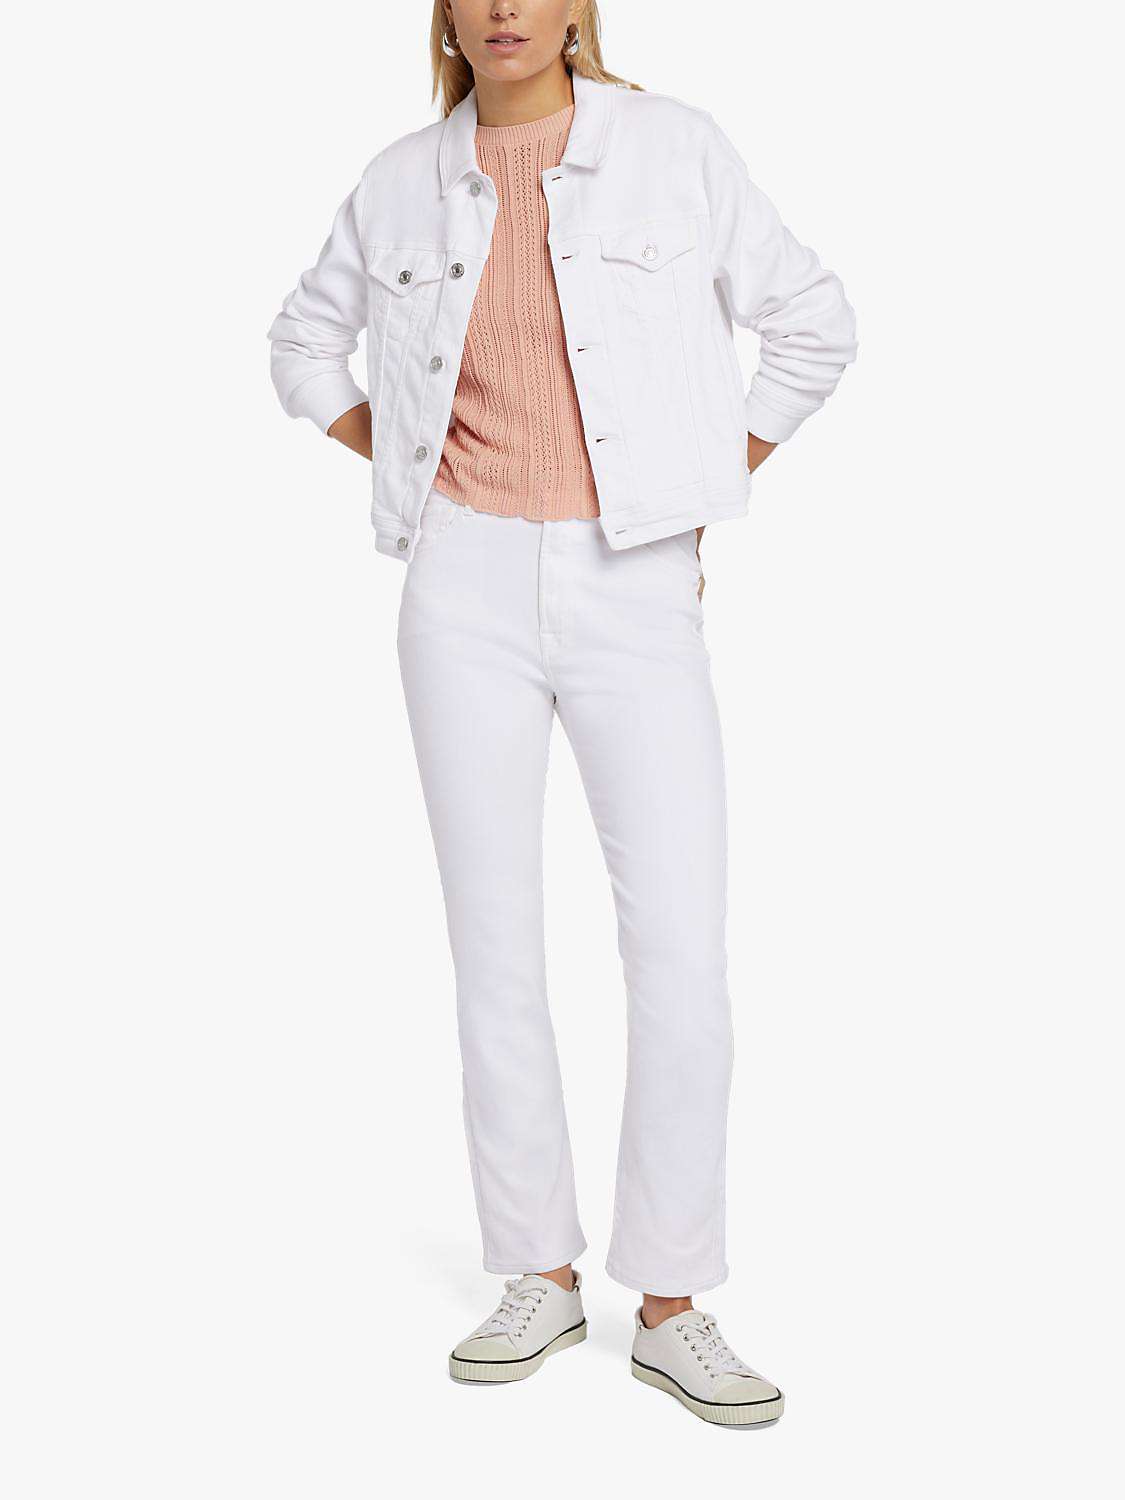 Buy 7 For All Mankind Easy Slim Jeans, White Online at johnlewis.com